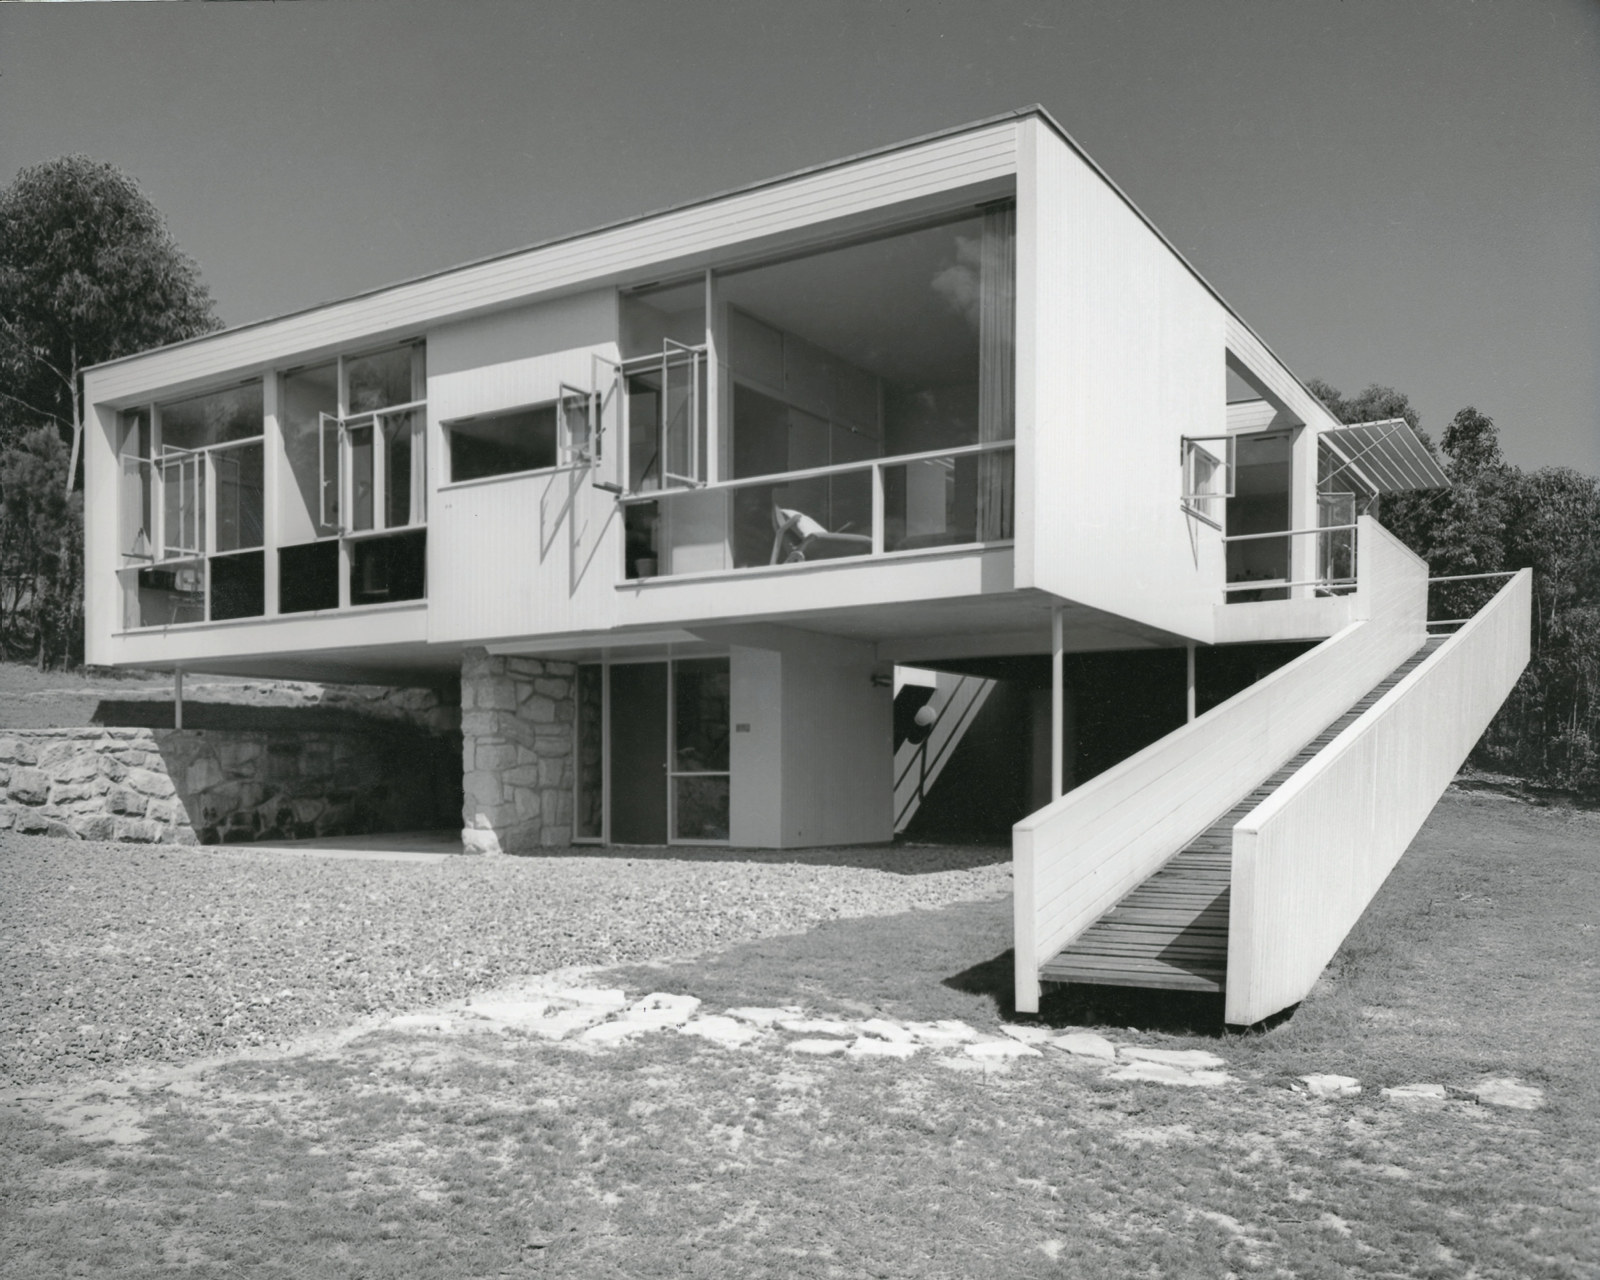 Diagonal B/W view of awesome white box-like house with large picture windws, suspended on poles and entrance lobby, with long sloping ramp connecting deck to ground and driveway area.